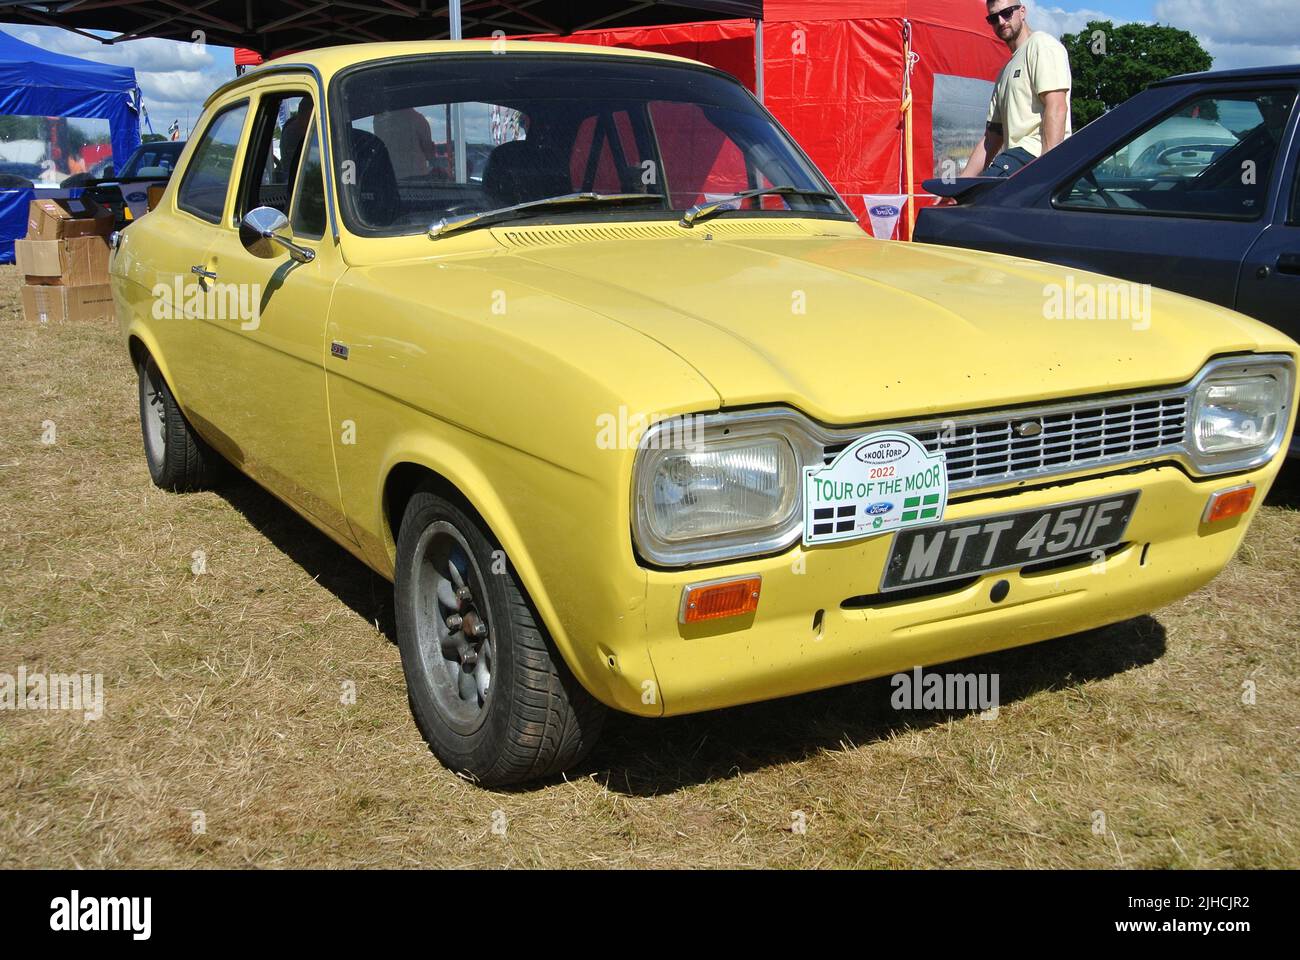 A 1968 Ford Escort Mk1 parked on display at the 47th Historic Vehicle Gathering classic car show, Powderham, Devon, England, UK. Stock Photo